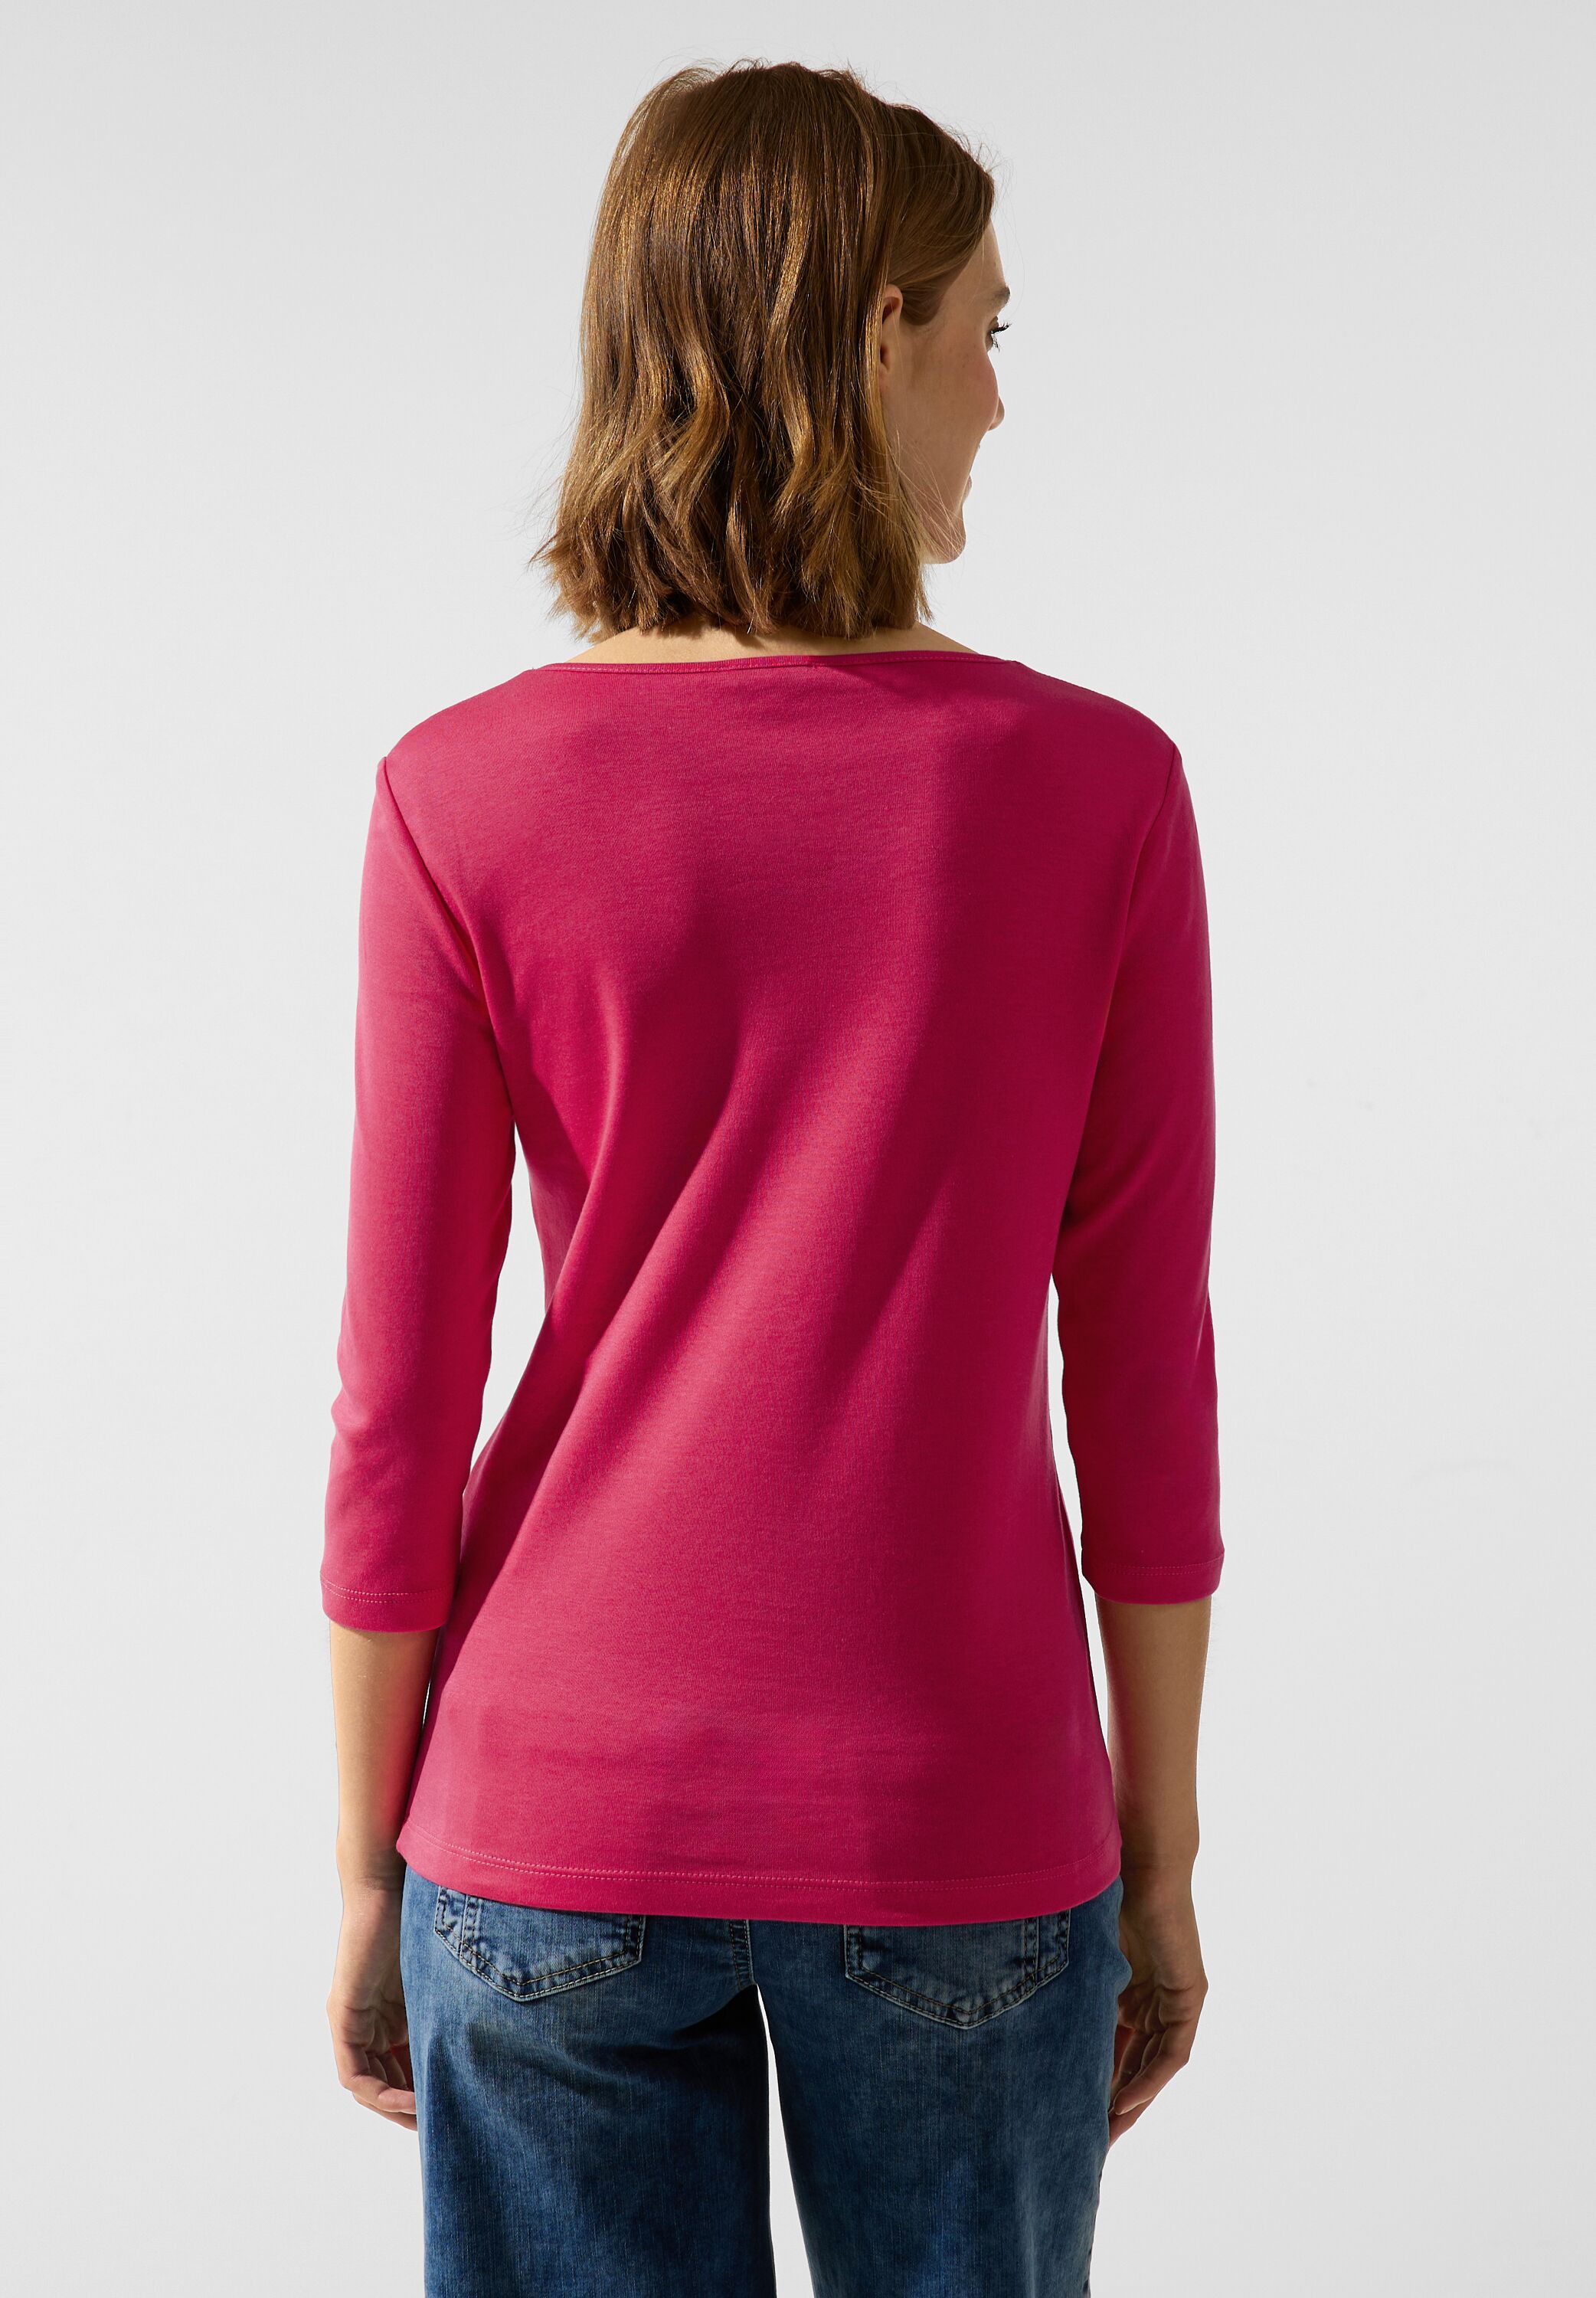 One in Unifarbe coral | blossom Street 36 | Shirt